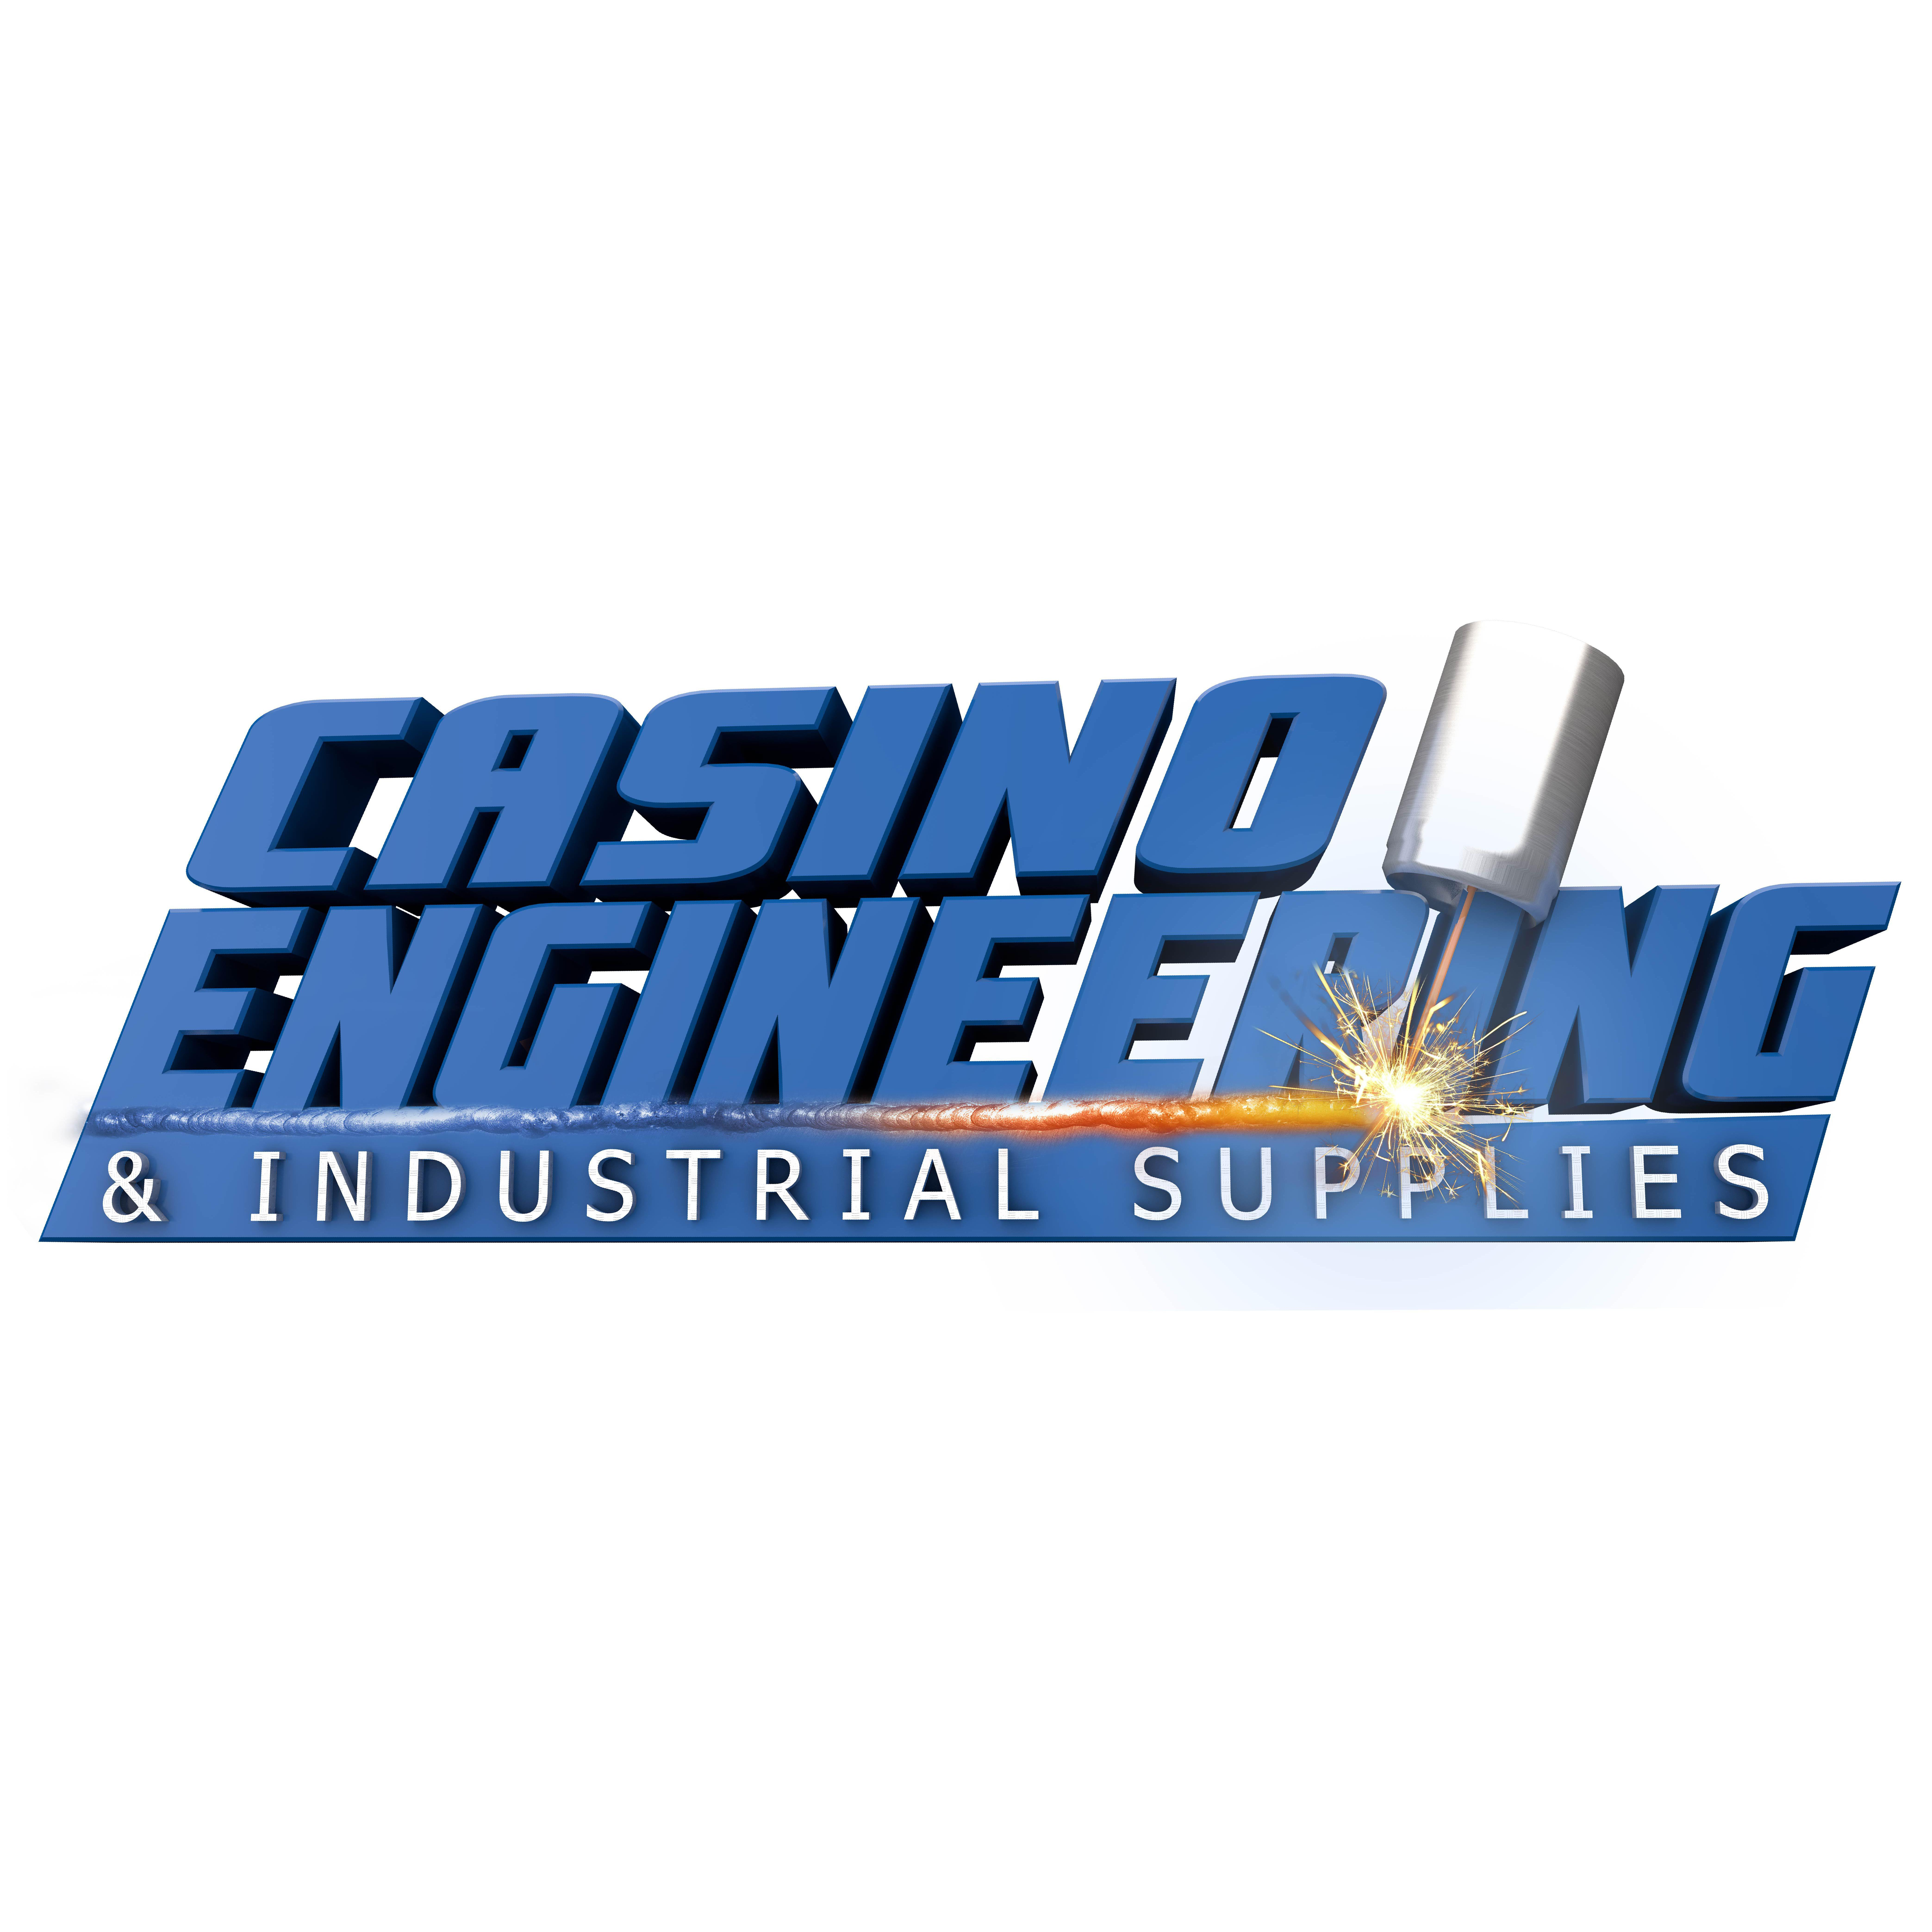 Casino Engineering and Industrial Supplies Logo